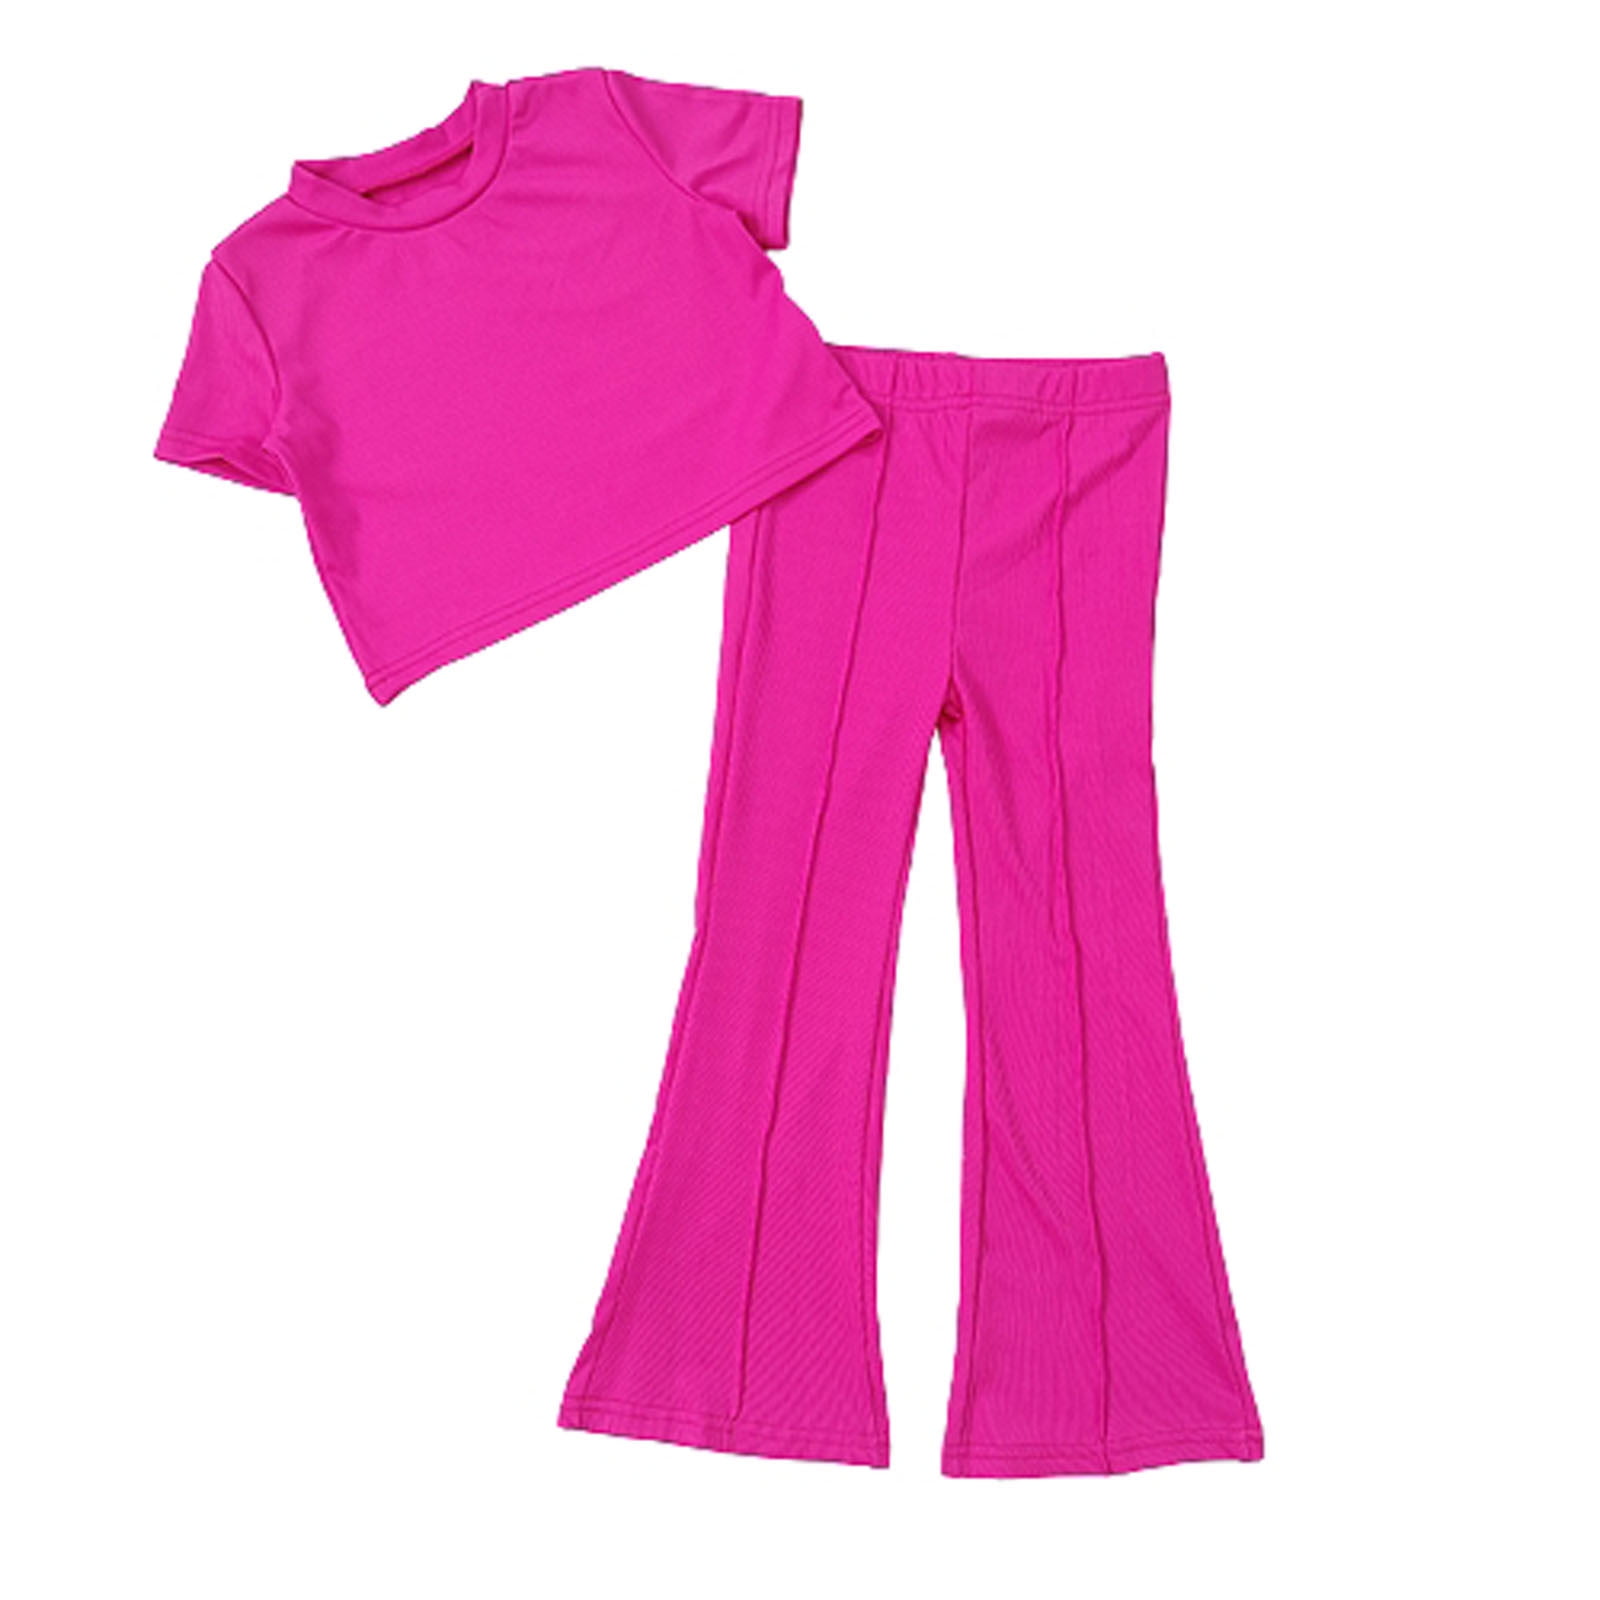 YYDGH Girls Short Sleeve Tops Flared Pants Clothes Set Child Kids Solid  Color T Shirt Flared Bottom Outfits(Hot Pink,2-3 Years)